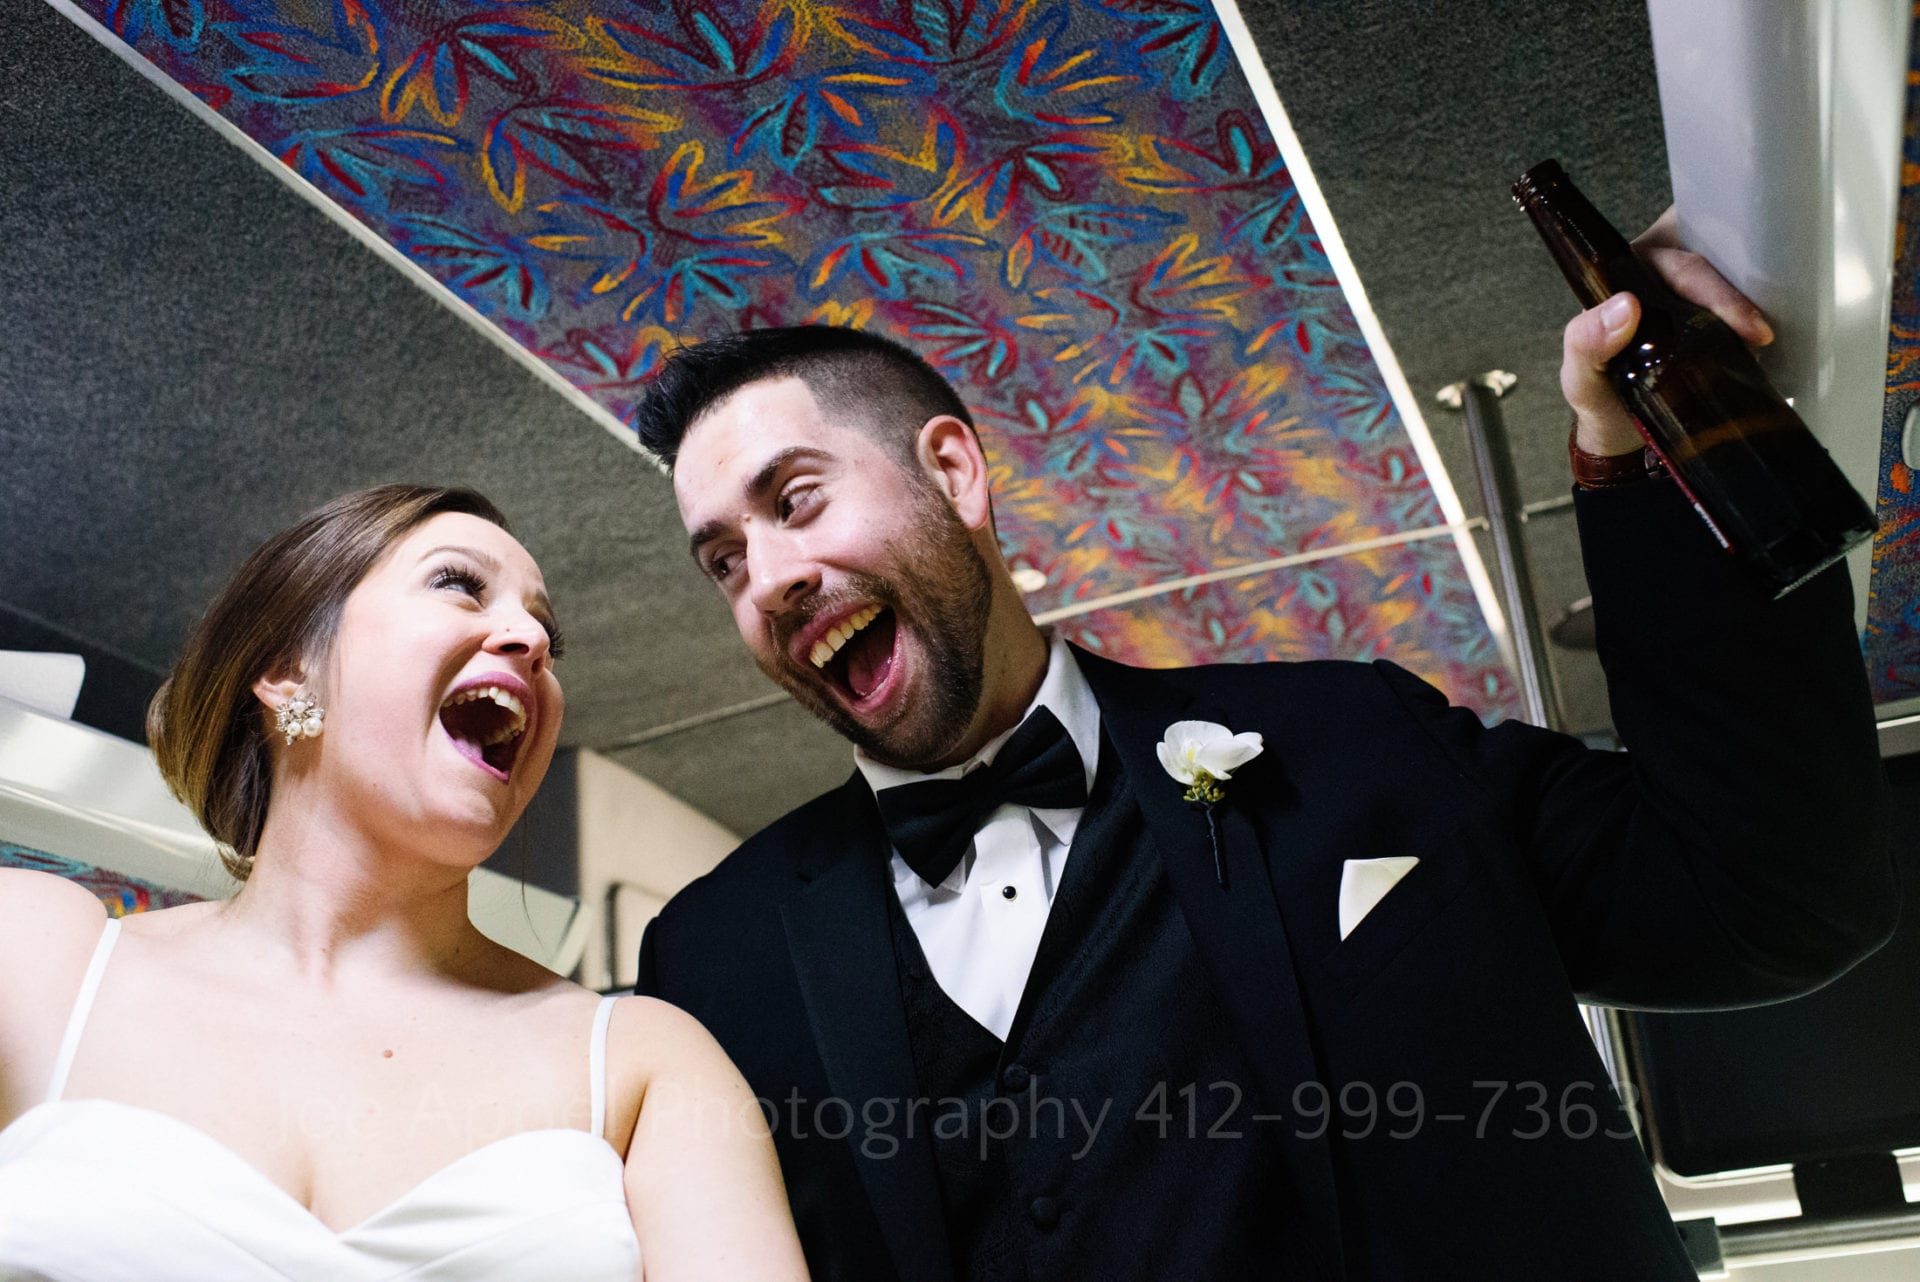 Seen from below, a bride and groom sing to each other as they ride in a limousine bus. The groom holds a bottle of beer in his left hand.